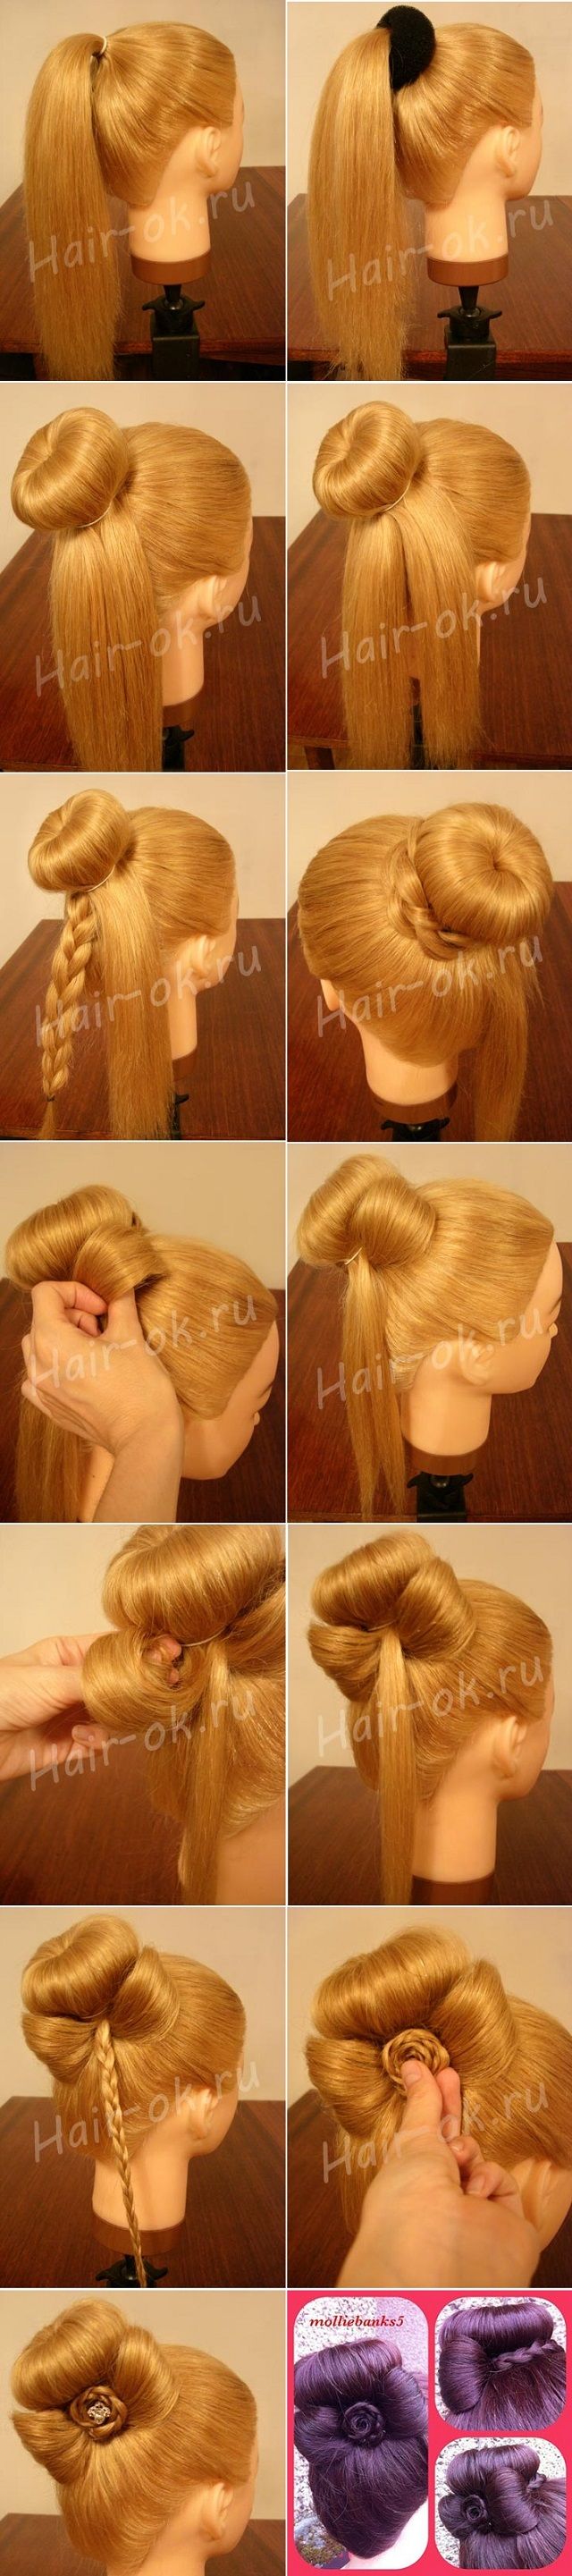 Long Hairstyles for Girls Step By Step Tutorial & Trends with Pictures (6)